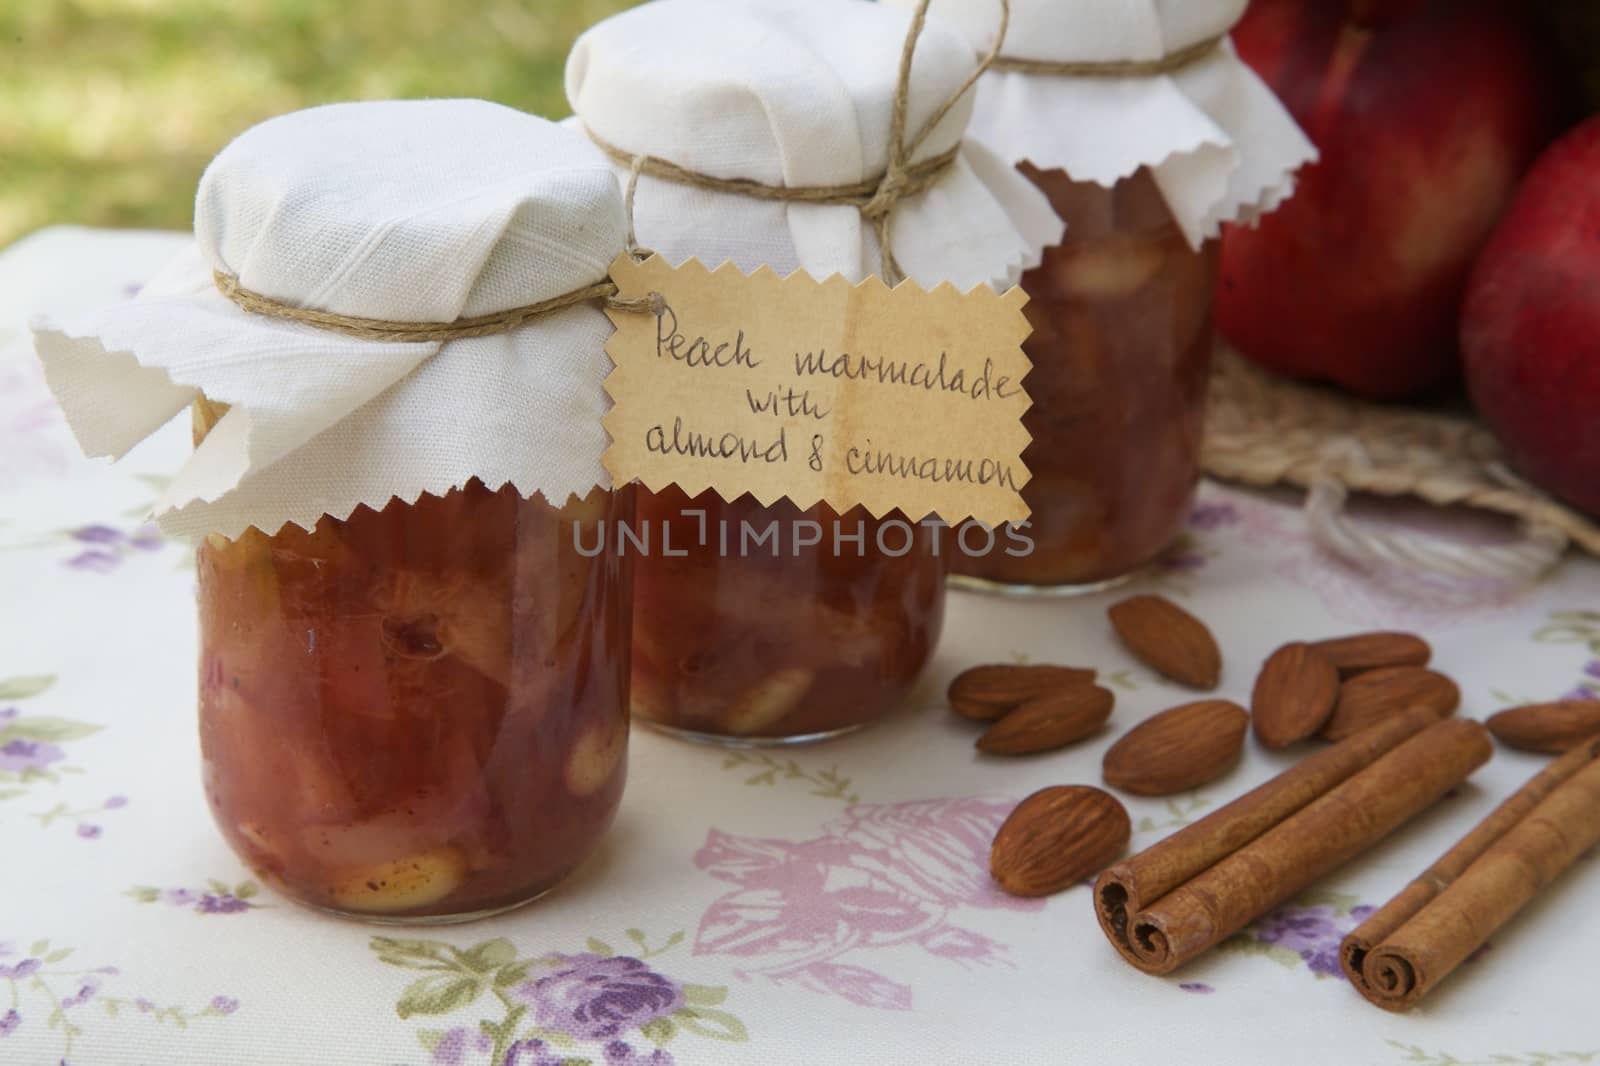 Homemade peach marmalade with almond nuts and cinnamon. Almonds,cinnamon sticks and fresh peaches in the background